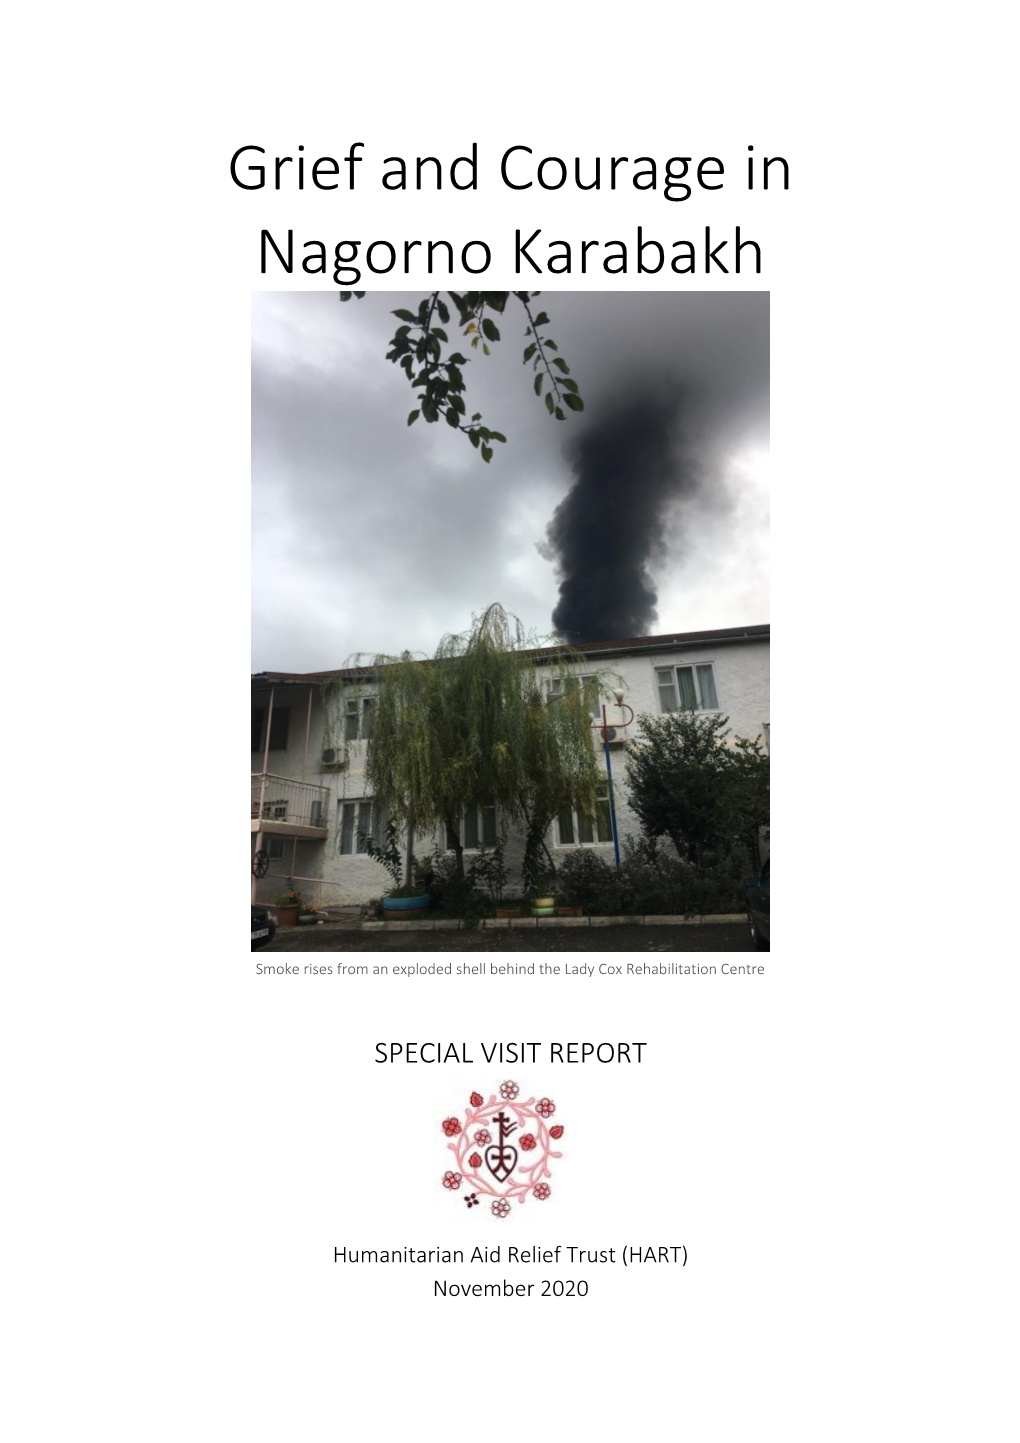 Grief and Courage in Nagorno Karabakh 2020 Visit Report